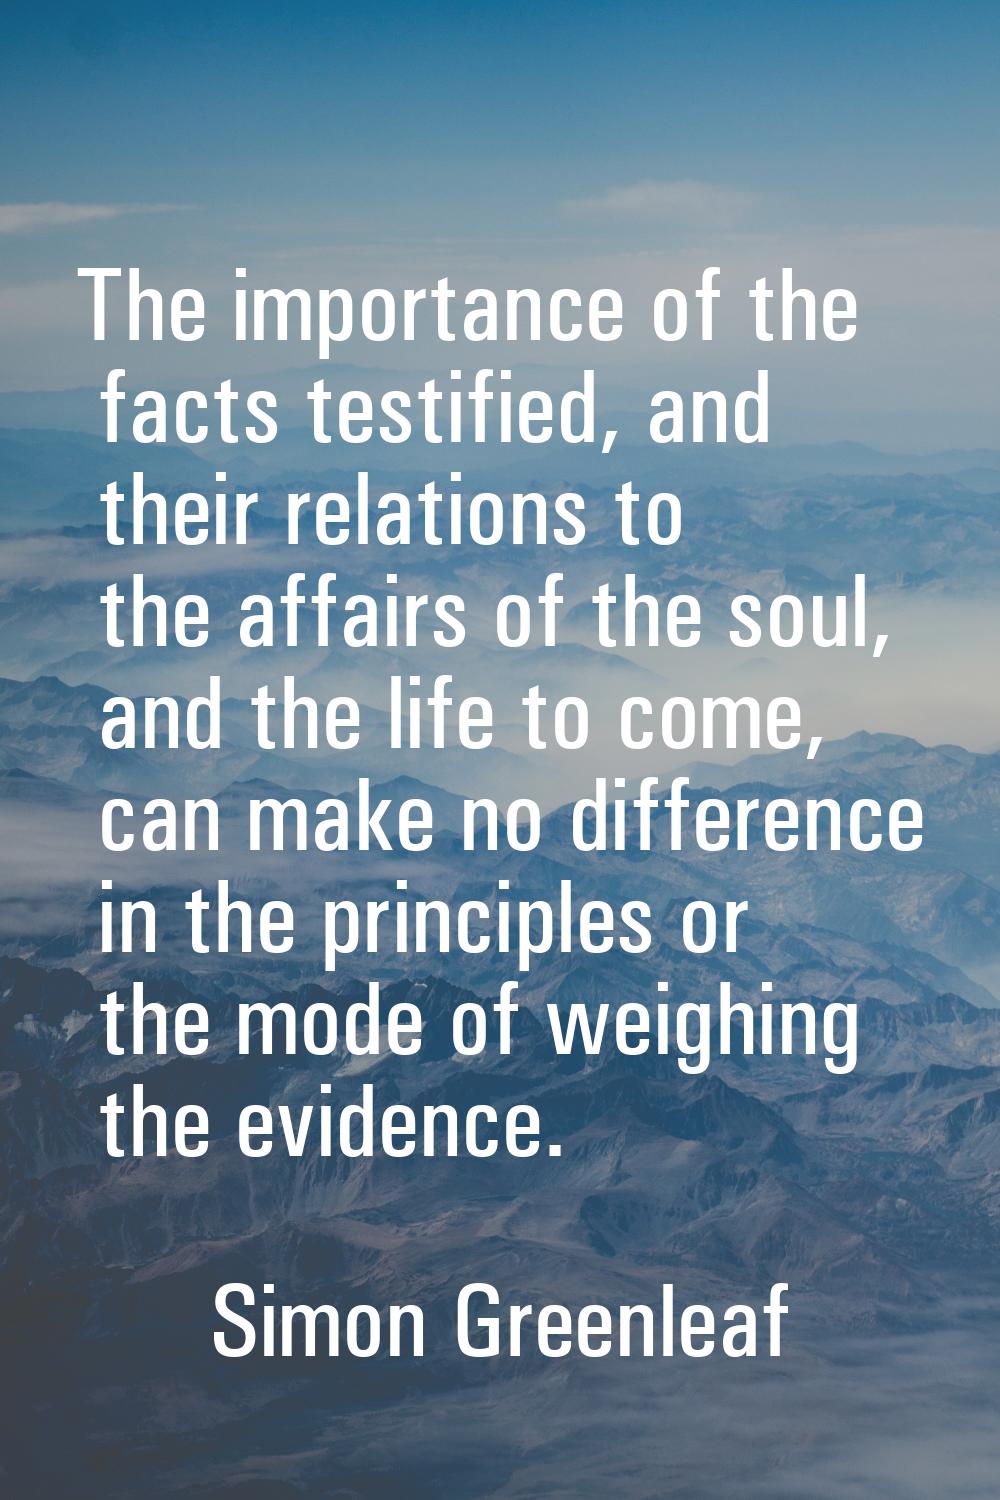 The importance of the facts testified, and their relations to the affairs of the soul, and the life